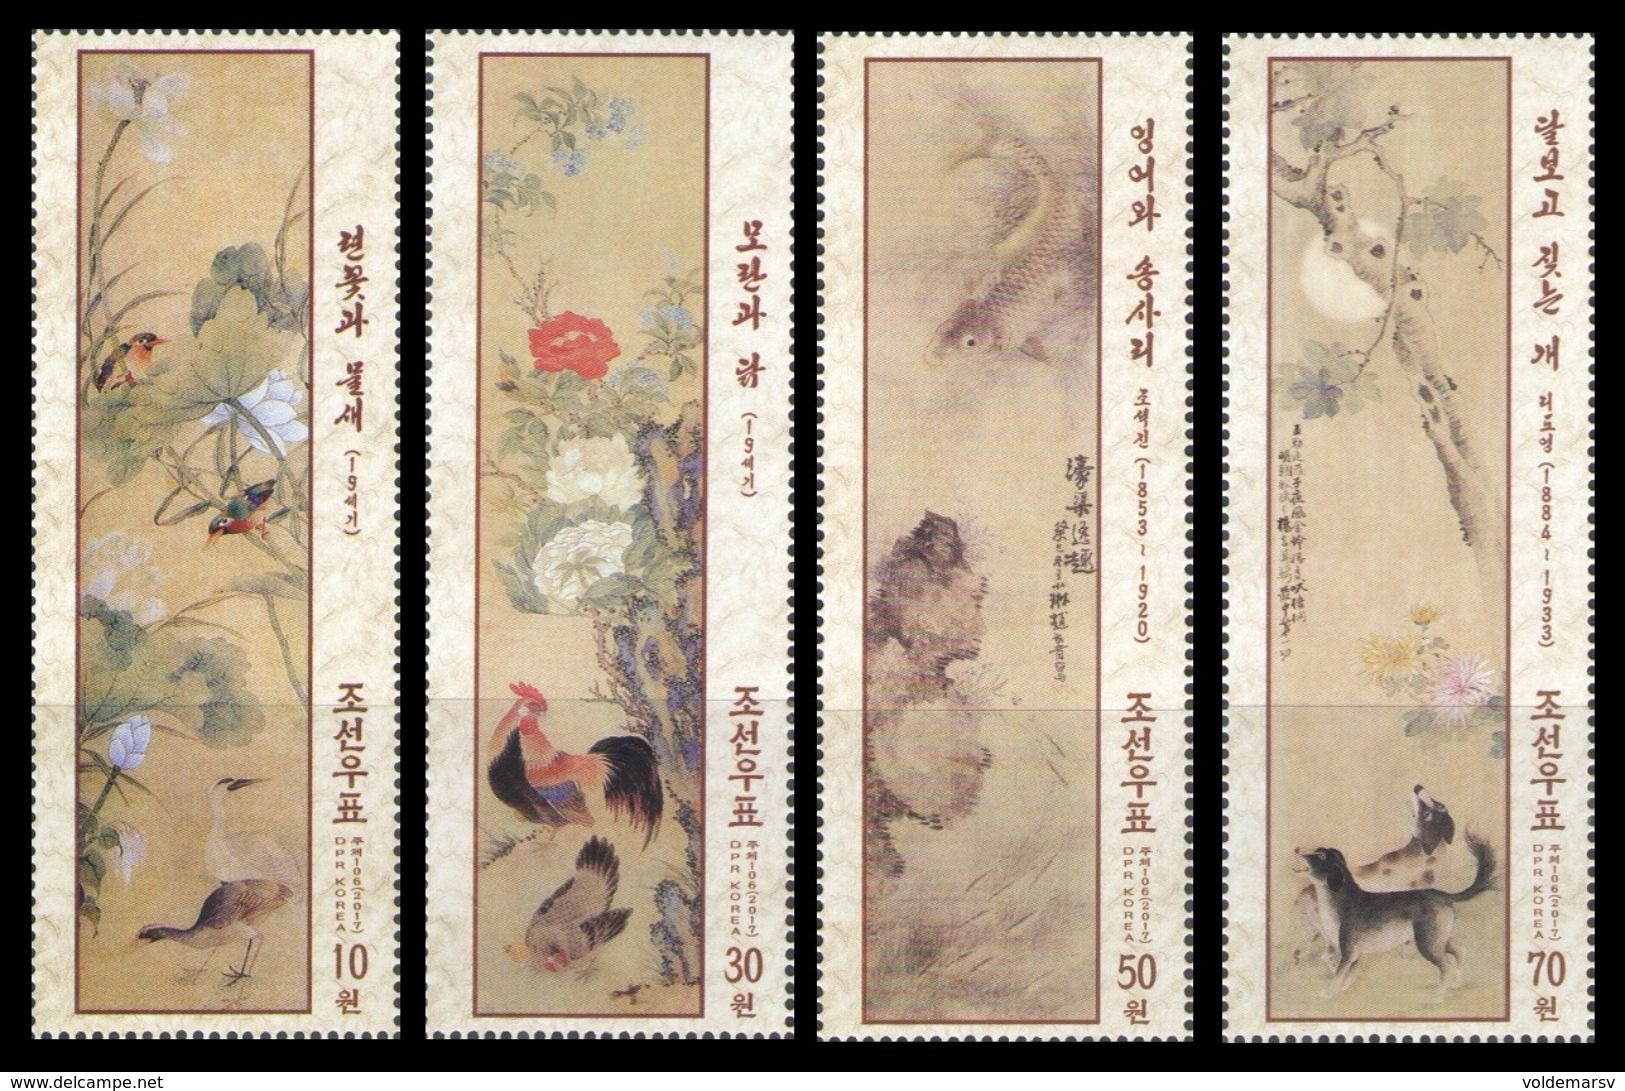 North Korea 2017 Mih. 6423/26 Flora And Fauna In Korean Paintings. Birds. Fishes. Dogs MNH ** - Korea, North